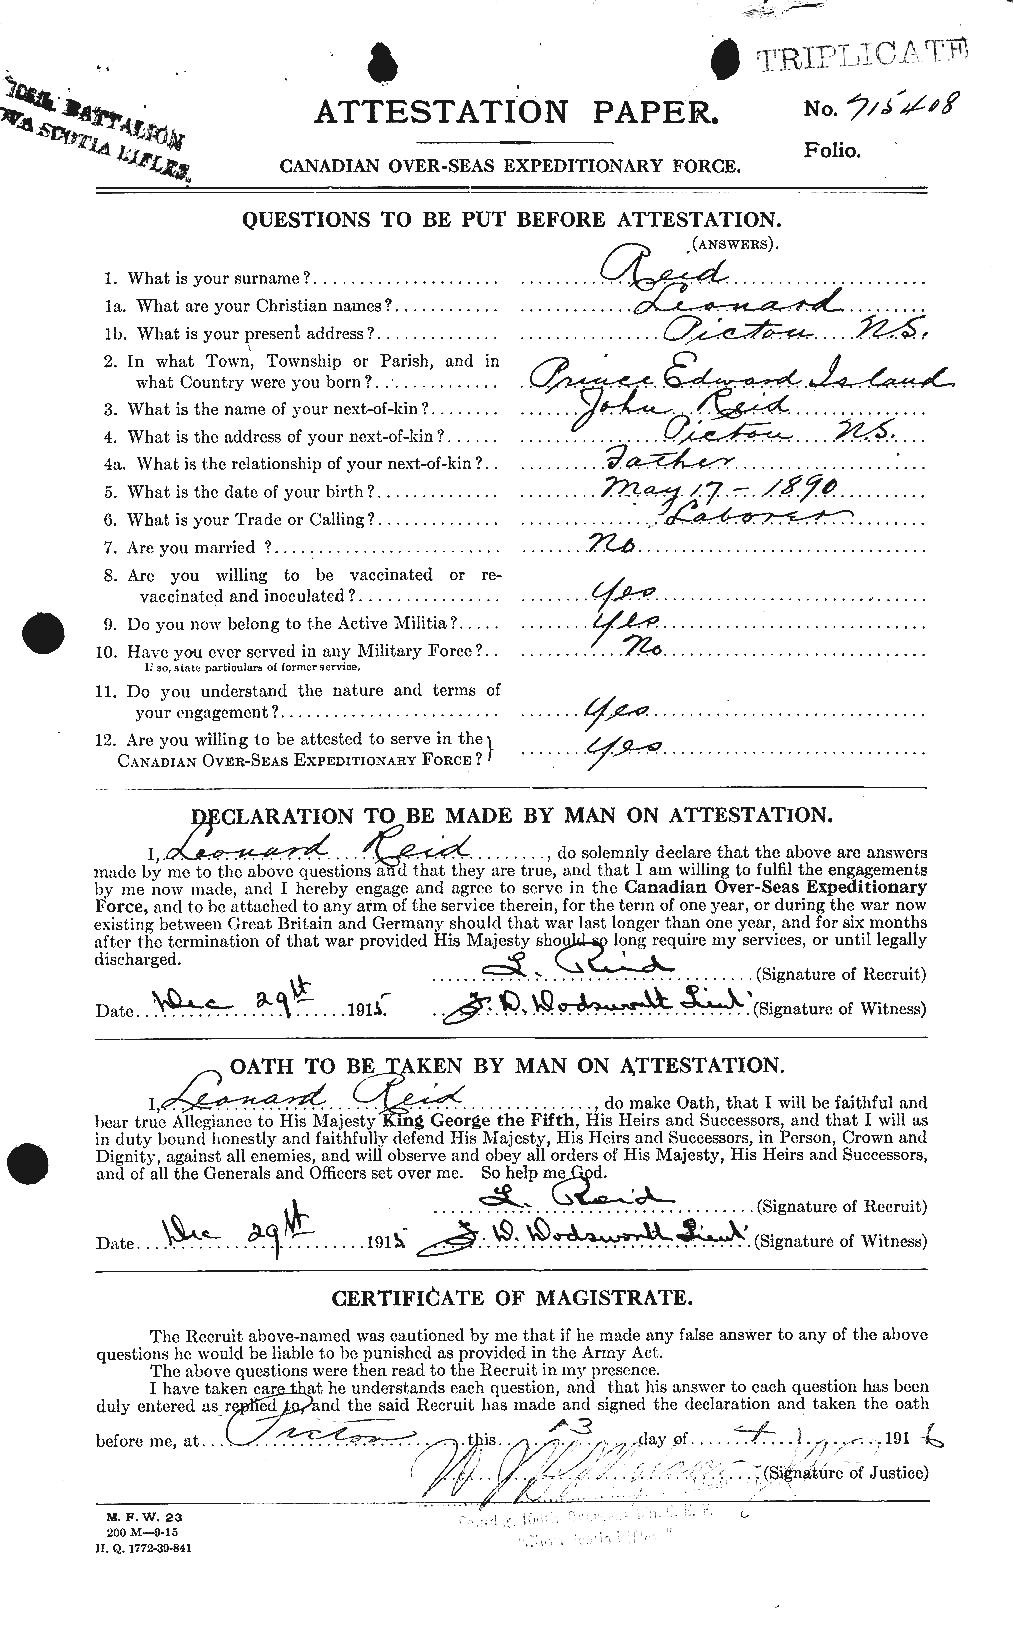 Personnel Records of the First World War - CEF 598916a